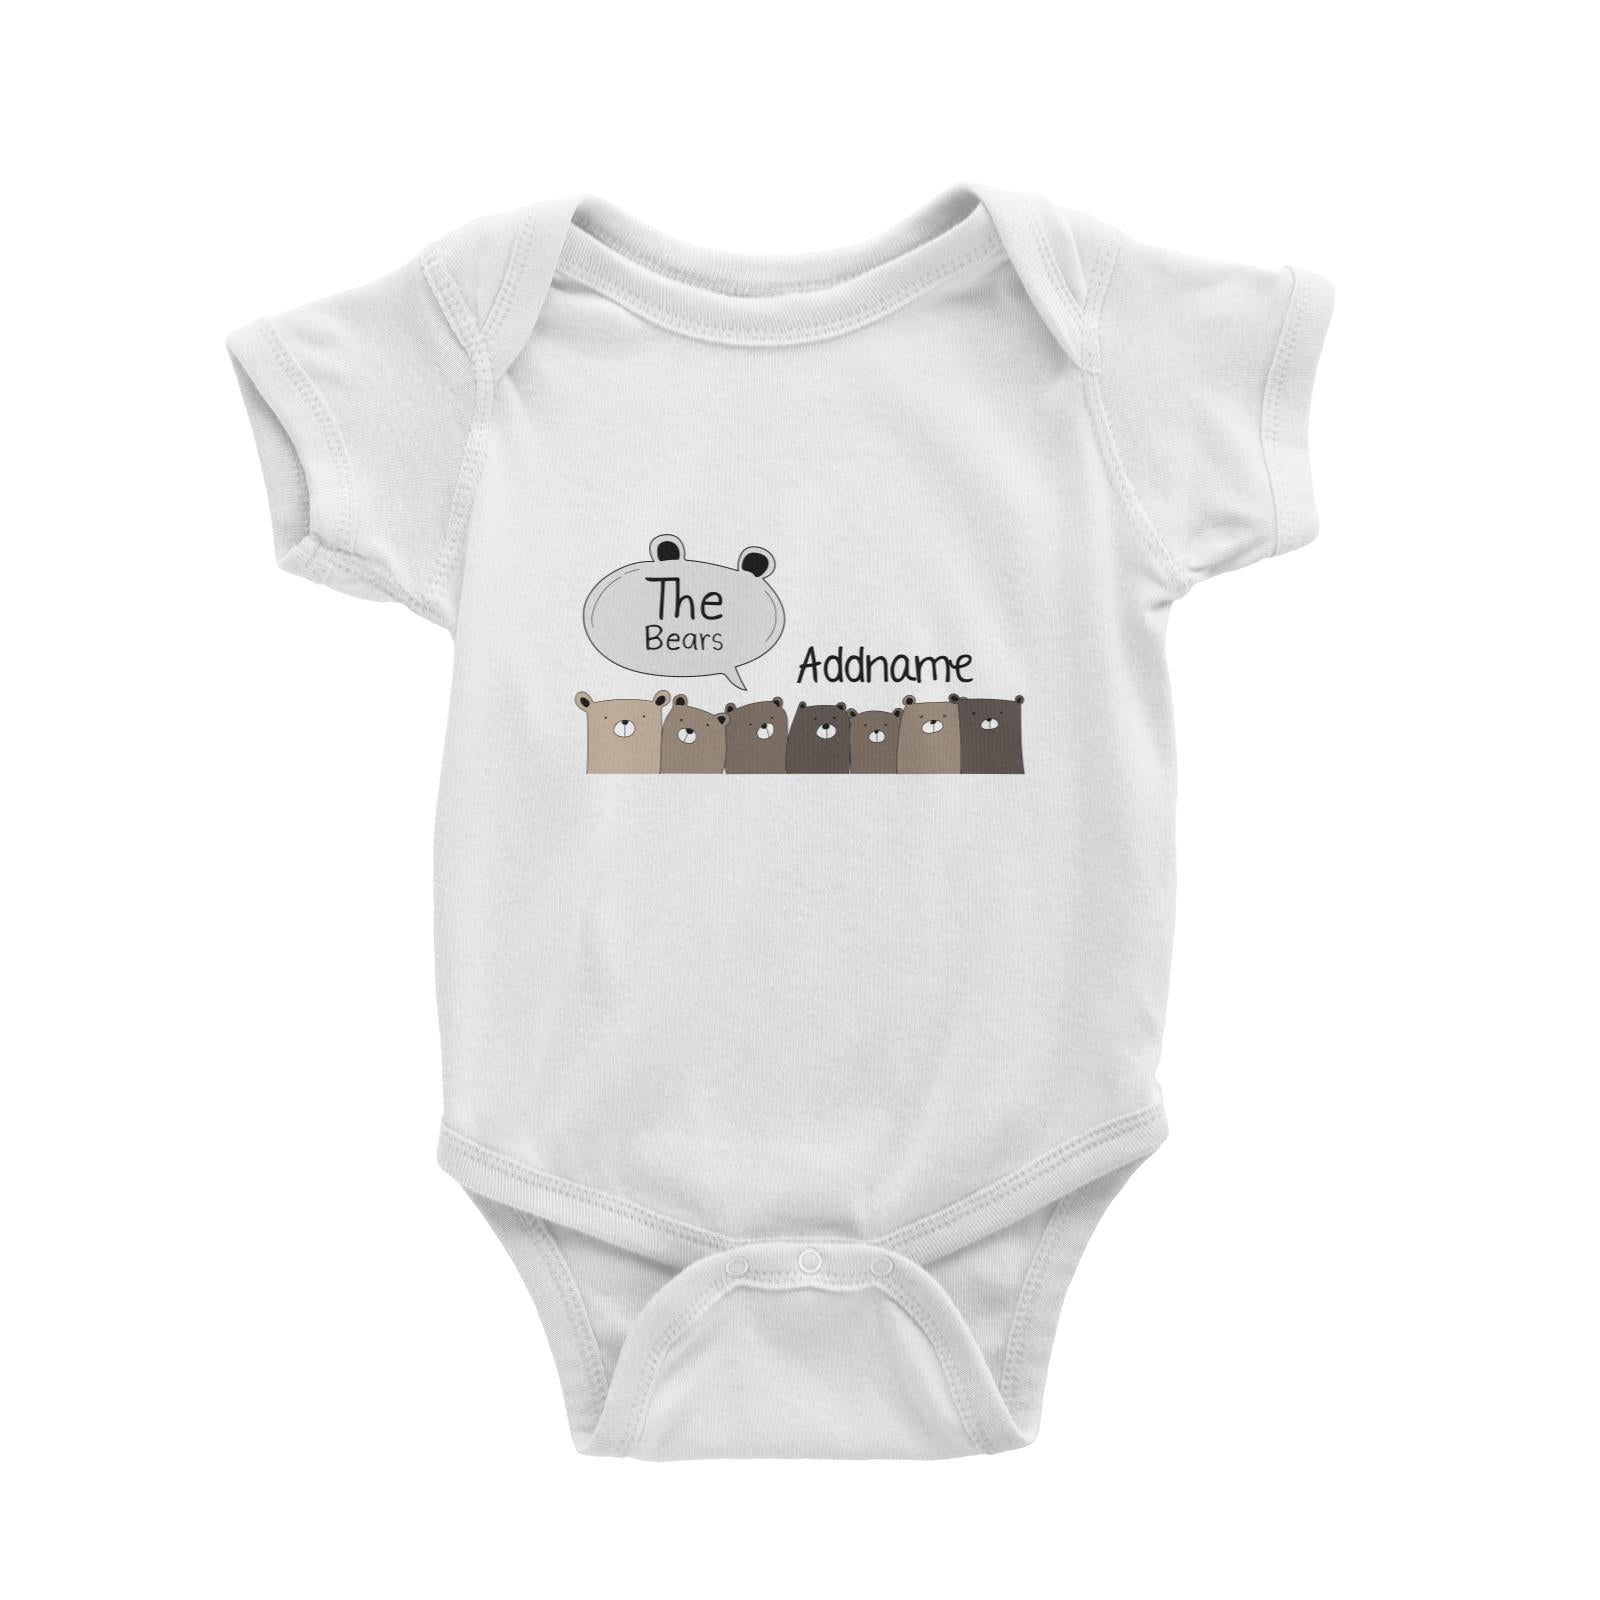 Cute Animals And Friends Series The Bears Group Addname Baby Romper